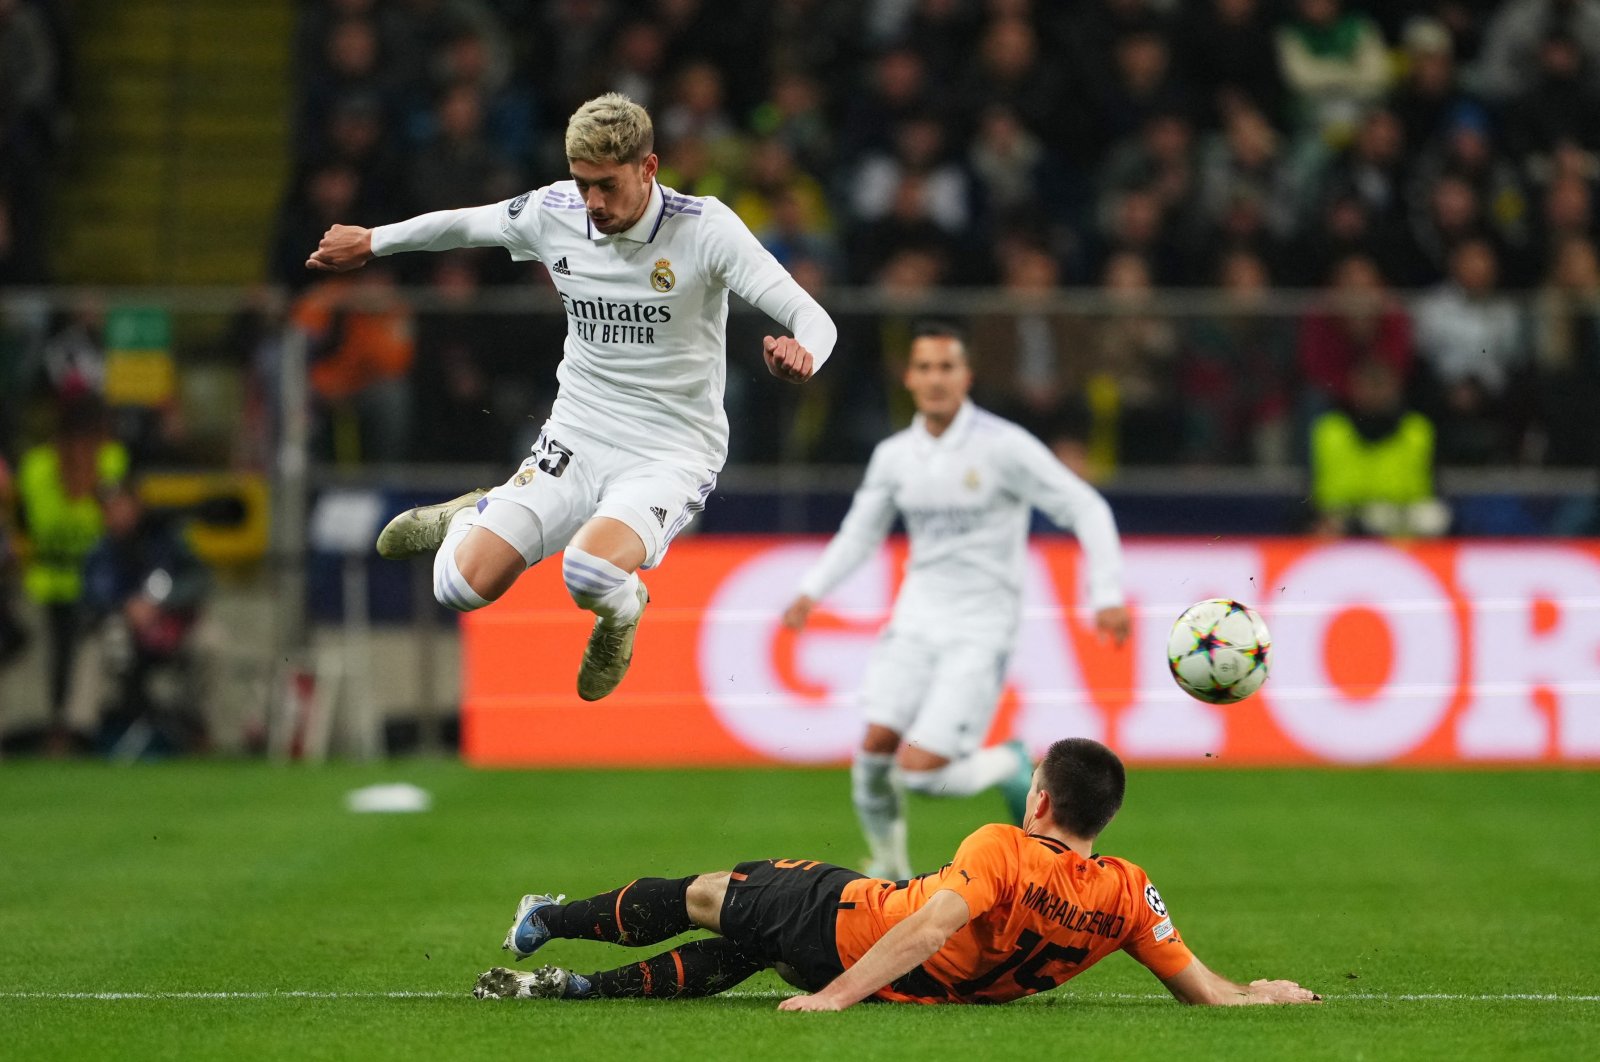 Real Madrid&#039;s Federico Valverde in action with Shakhtar Donetsk&#039;s Bogdan Mykhaylychenko during Champions League match Shakhtar Donetsk versus Real Madrid at Stadion Wojska Polskiego, Warsaw, Poland, Oct. 11, 2022  (Reuters Photo)